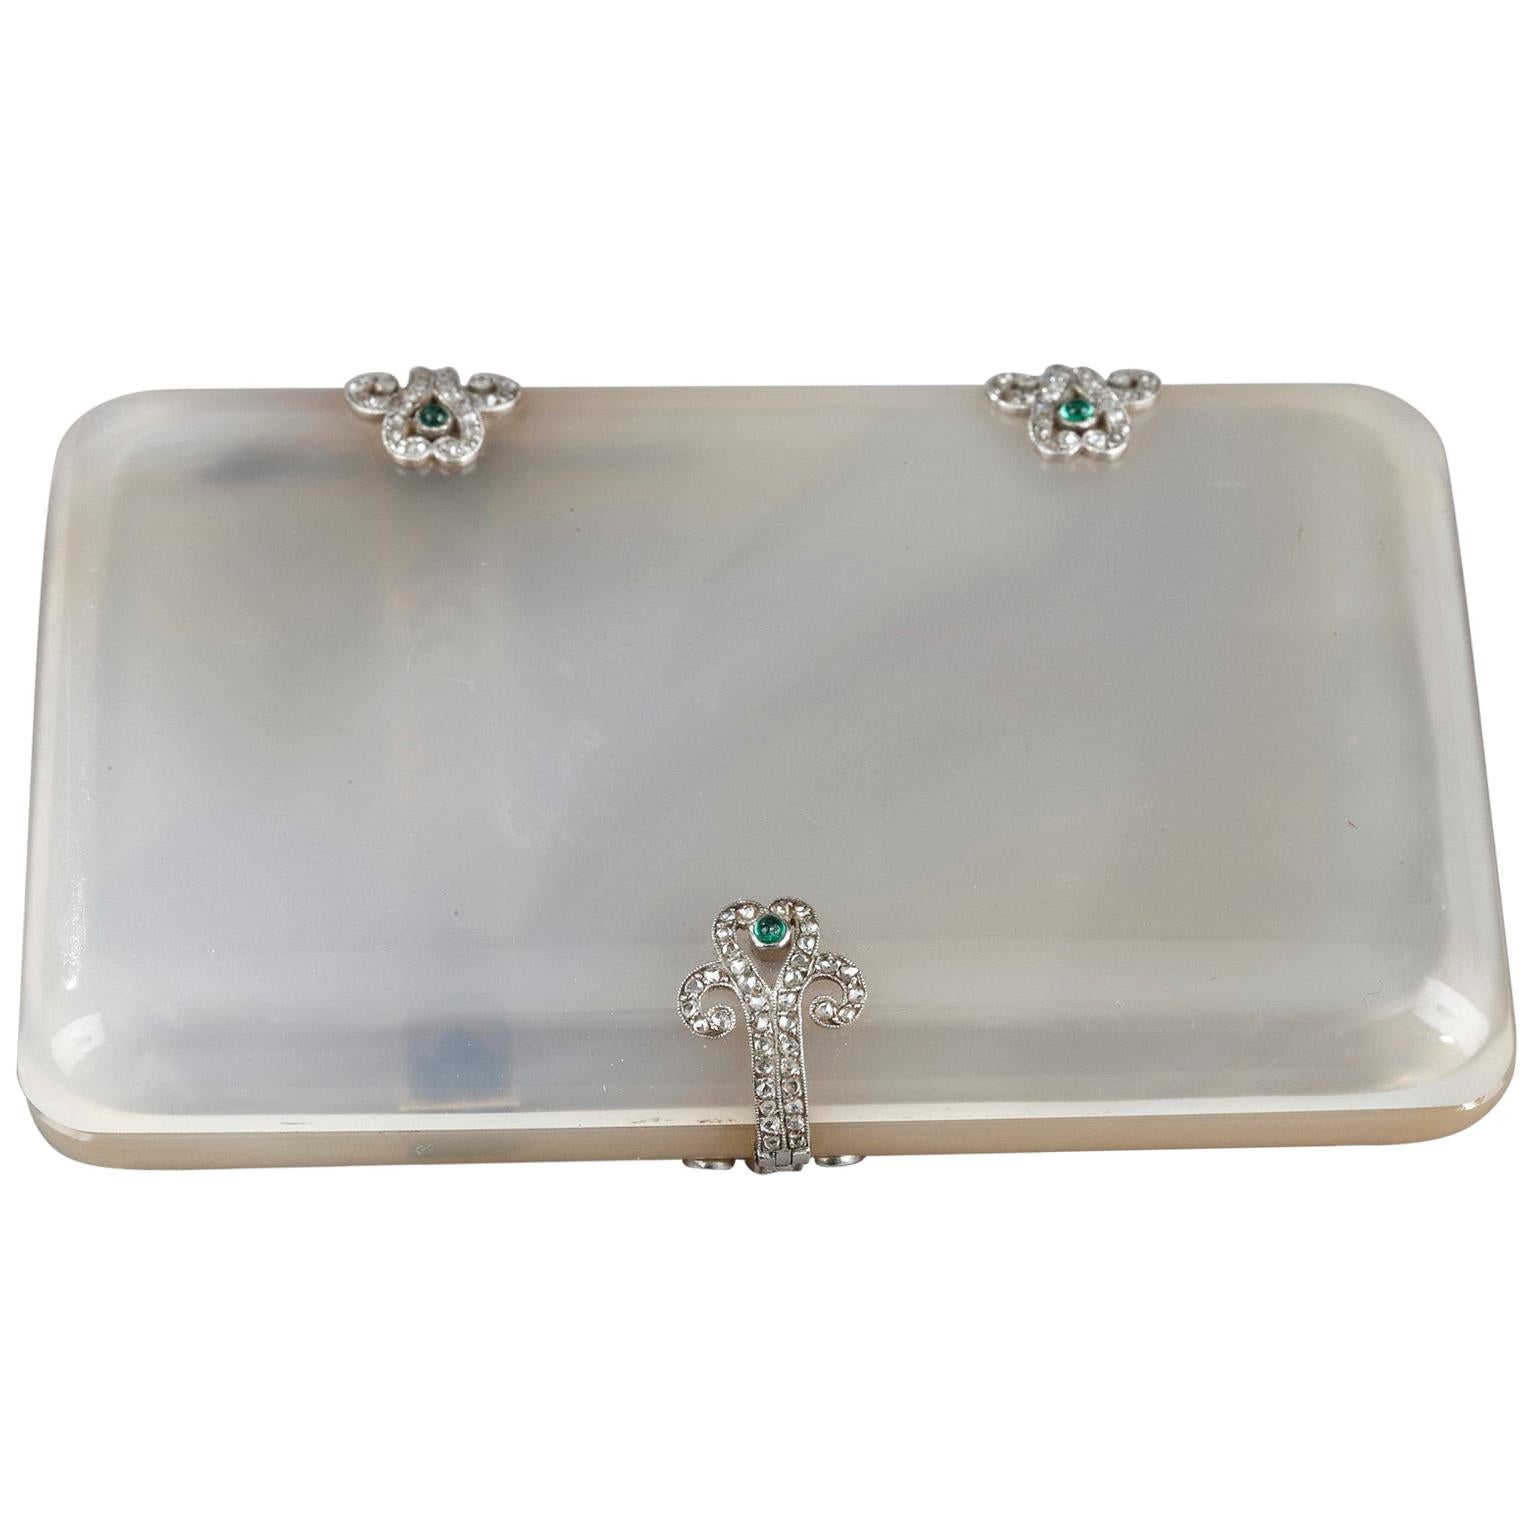 Art Deco Case with Agate, Gold, Diamonds and Emeralds